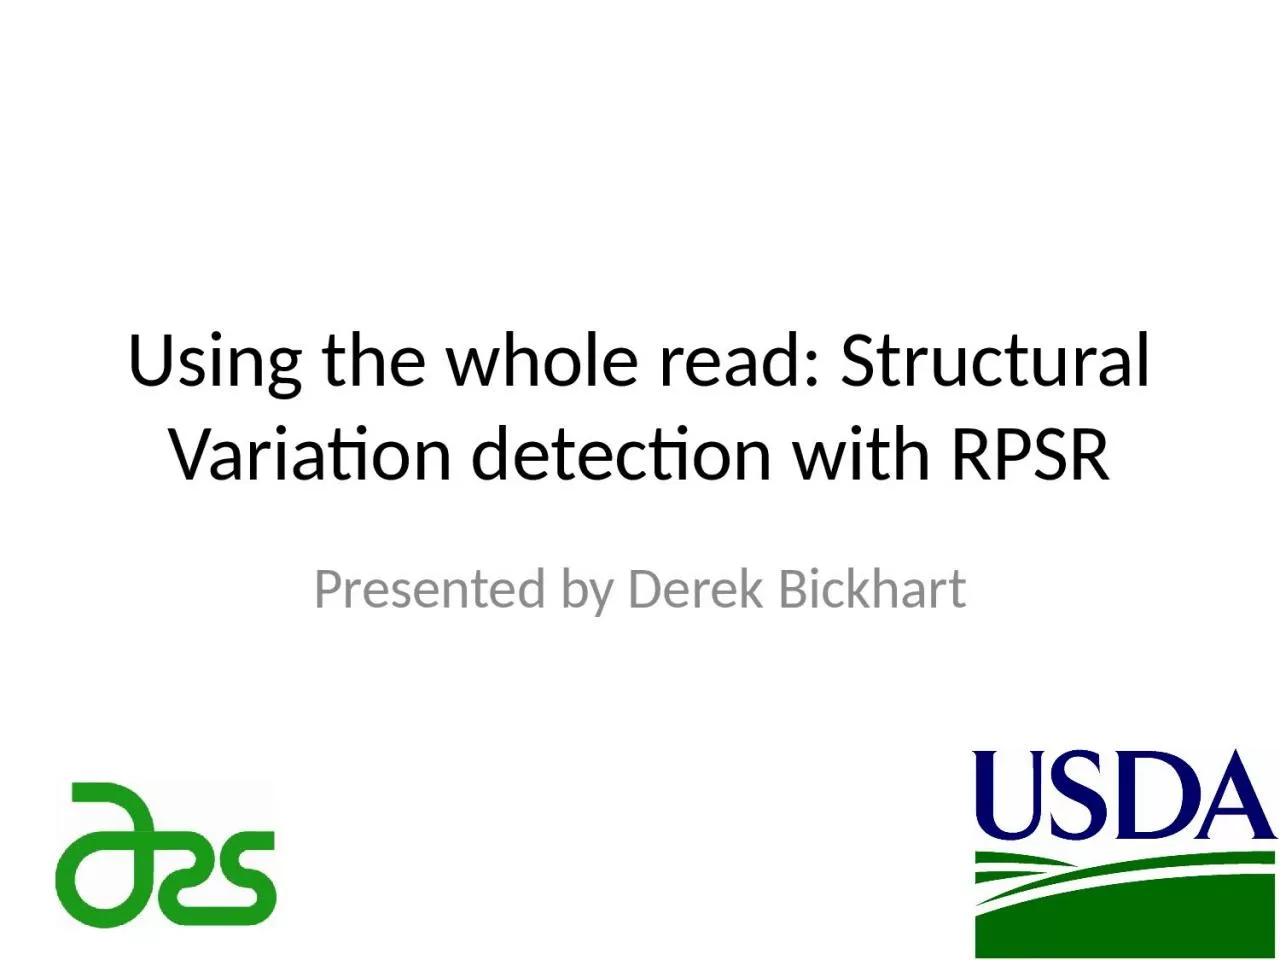 Using the whole read: Structural Variation detection with RPSR